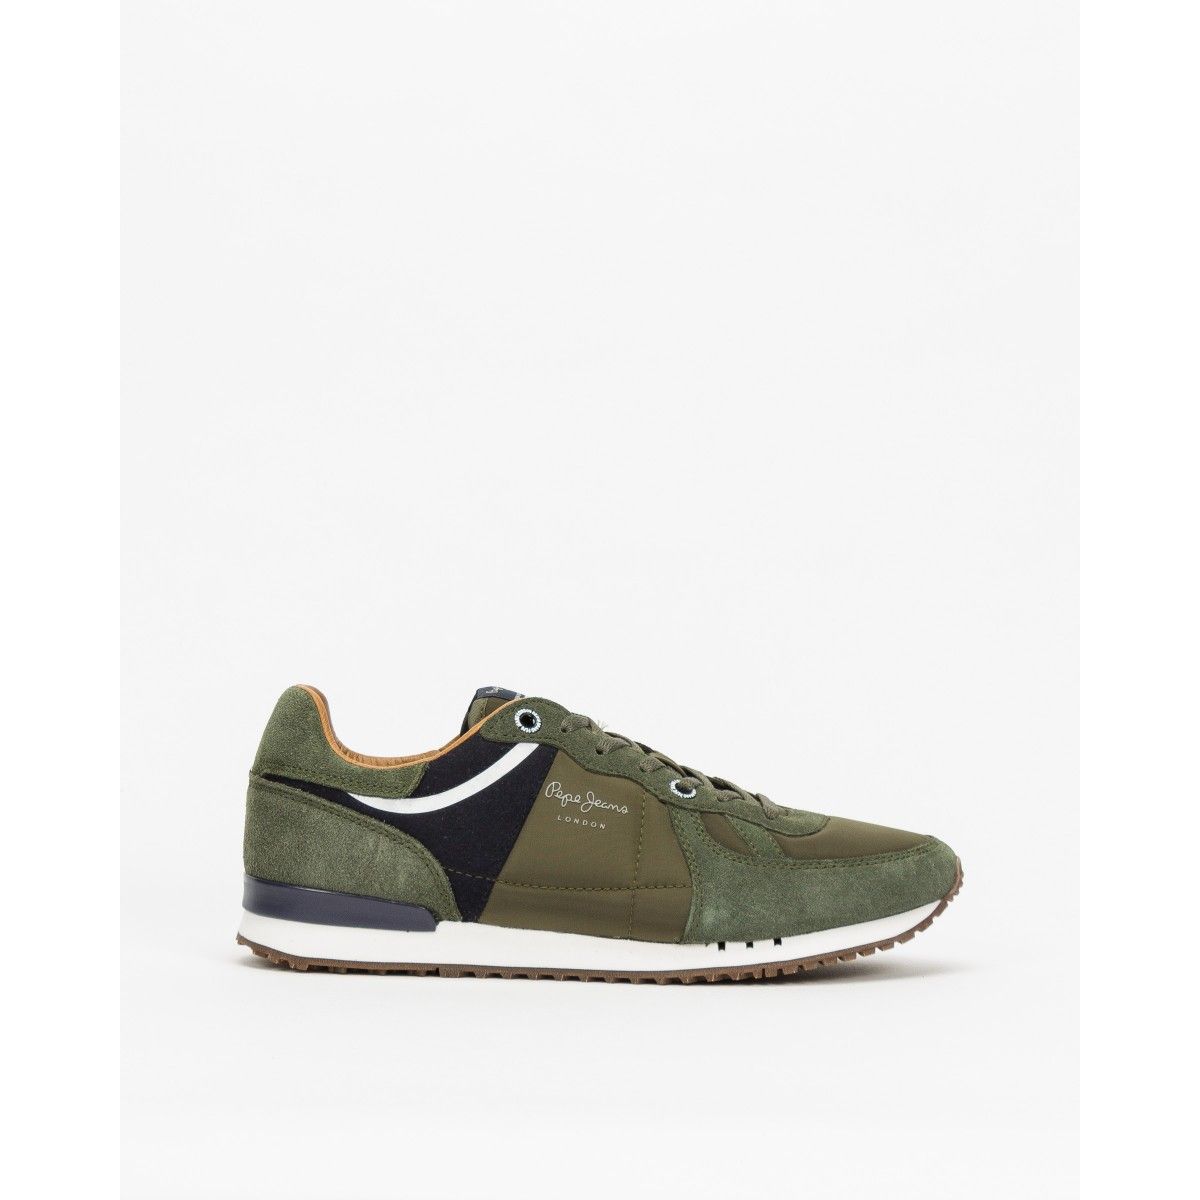 Pepe Jeans Tinker 1973 Sneakers Green - 300-30484I-10 | PROF Online Store